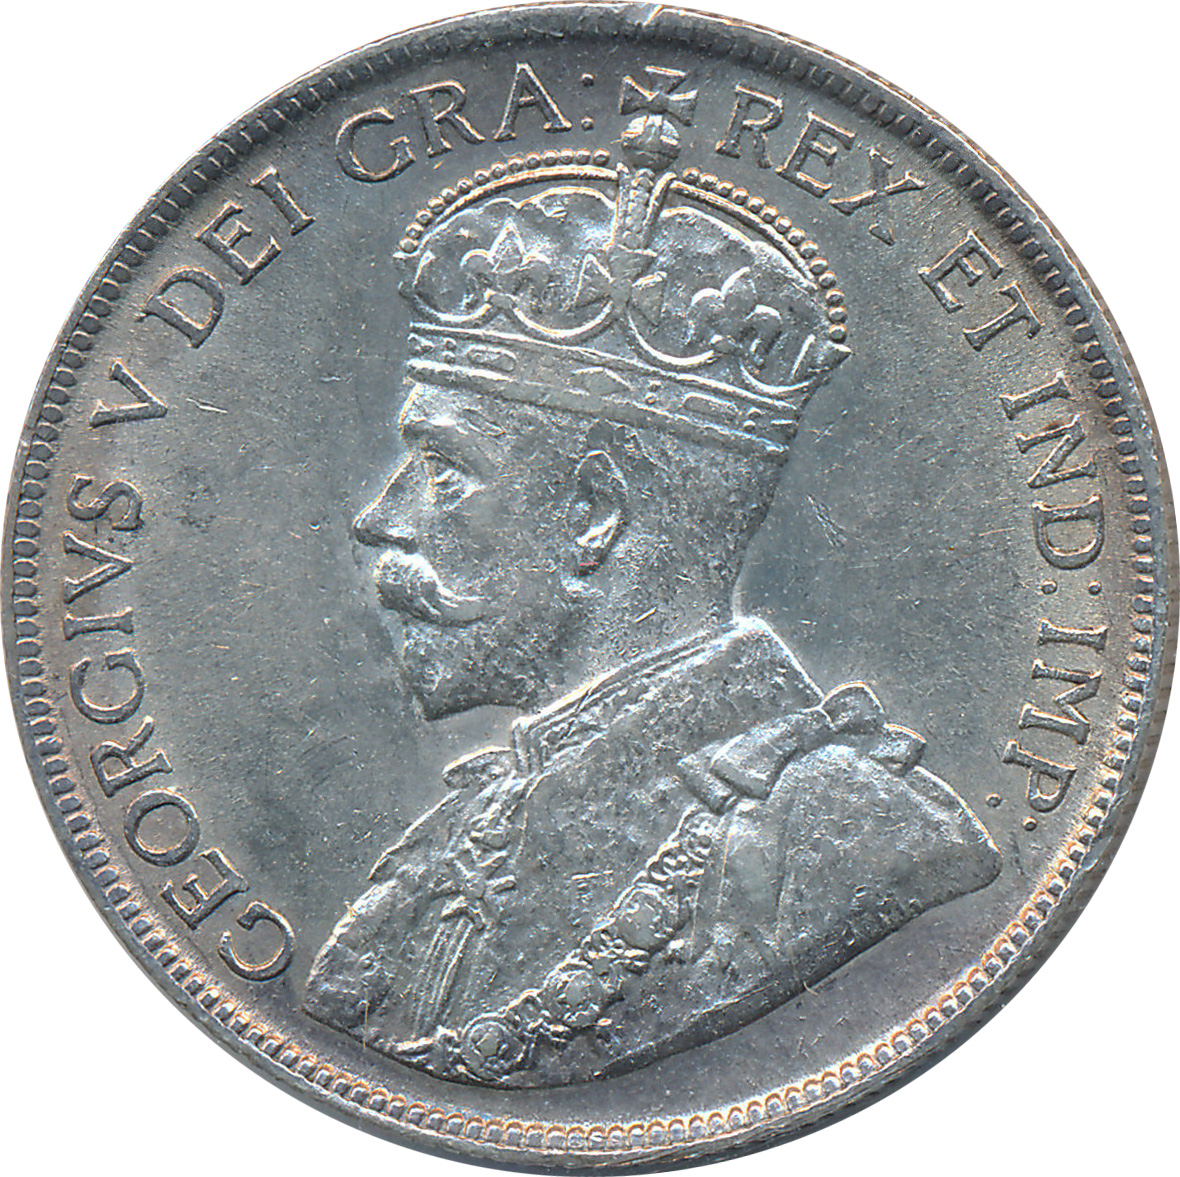 AU-50 - 50 cents 1911 to 1936 - George V